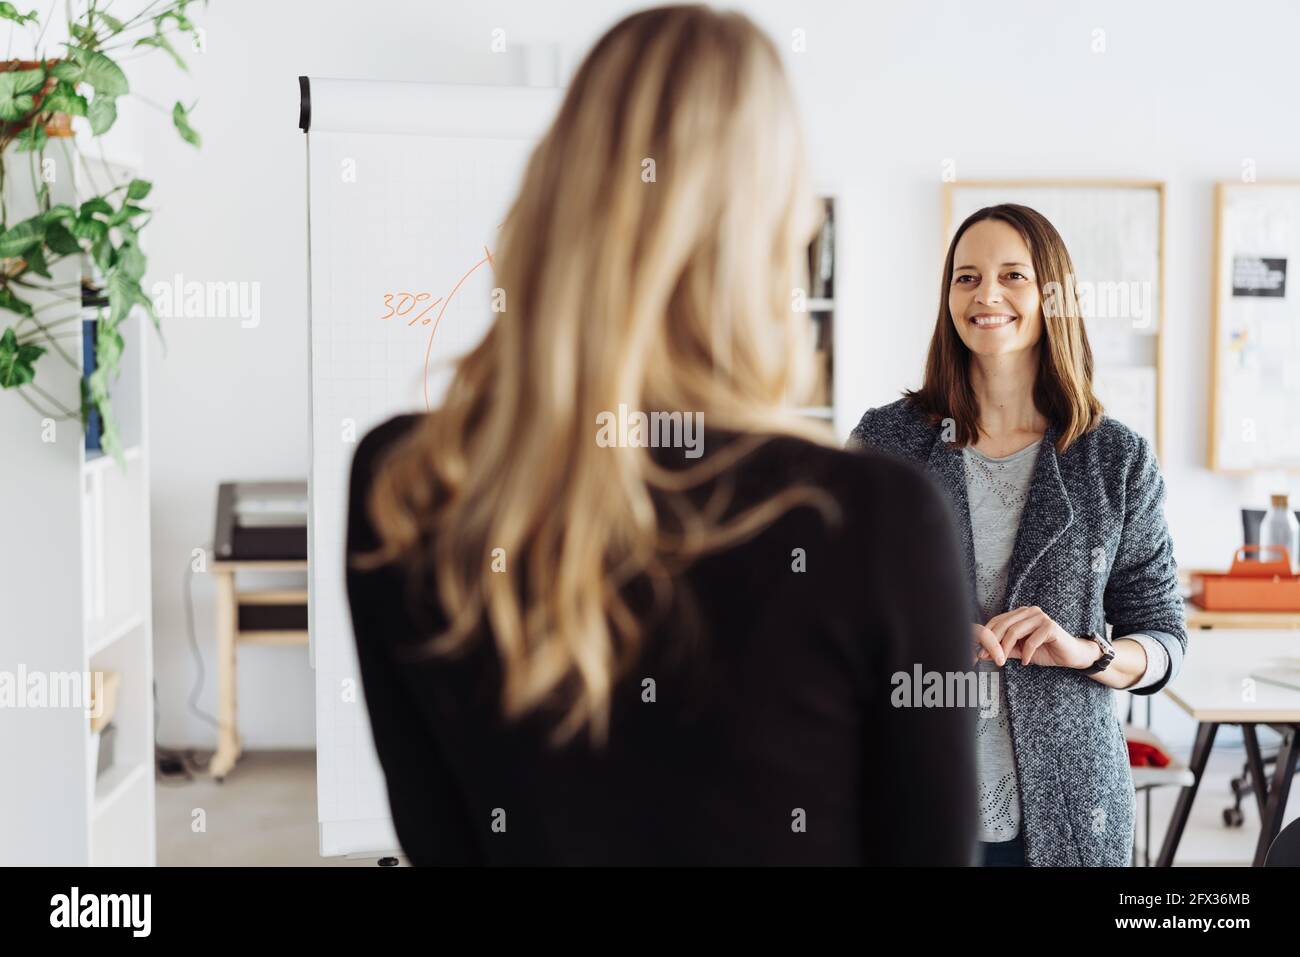 Two happy business partners or team colleagues having a discussion alongside a flip board with chart in a high key office in an over the shoulder view Stock Photo